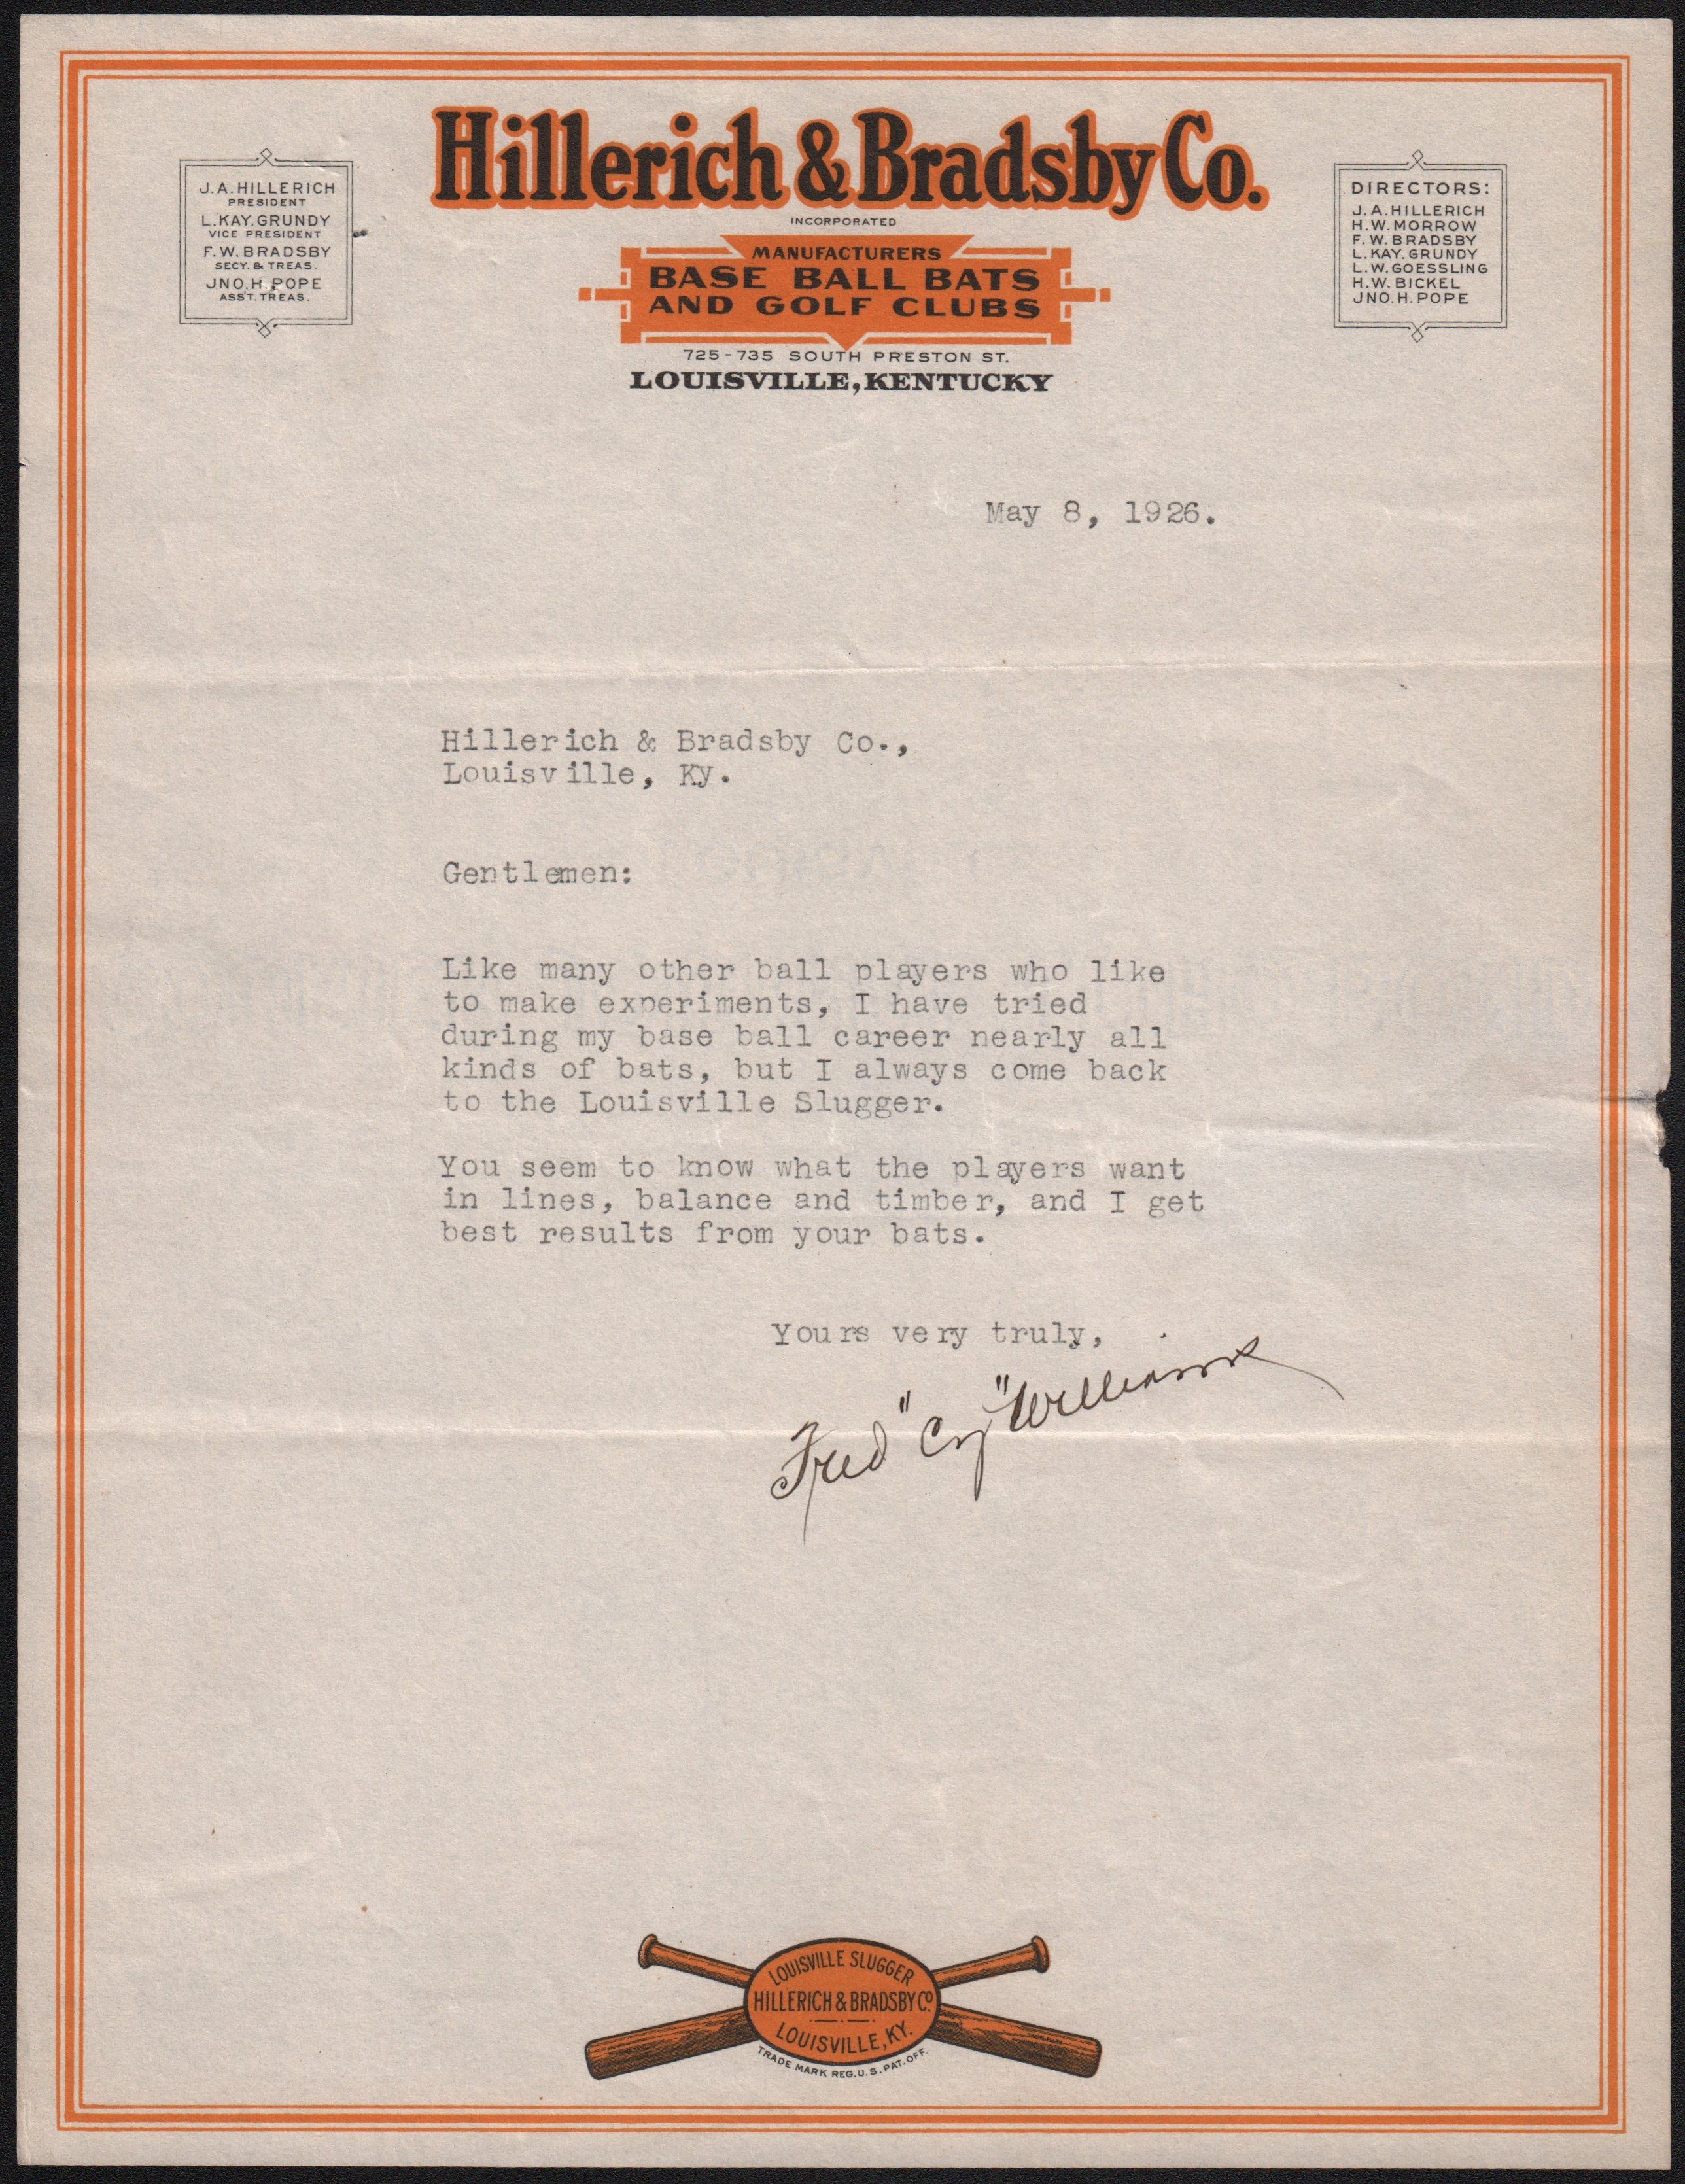 1926 Fred Cy Williams Hillerich & Bradsby Letter Endorsing Bats